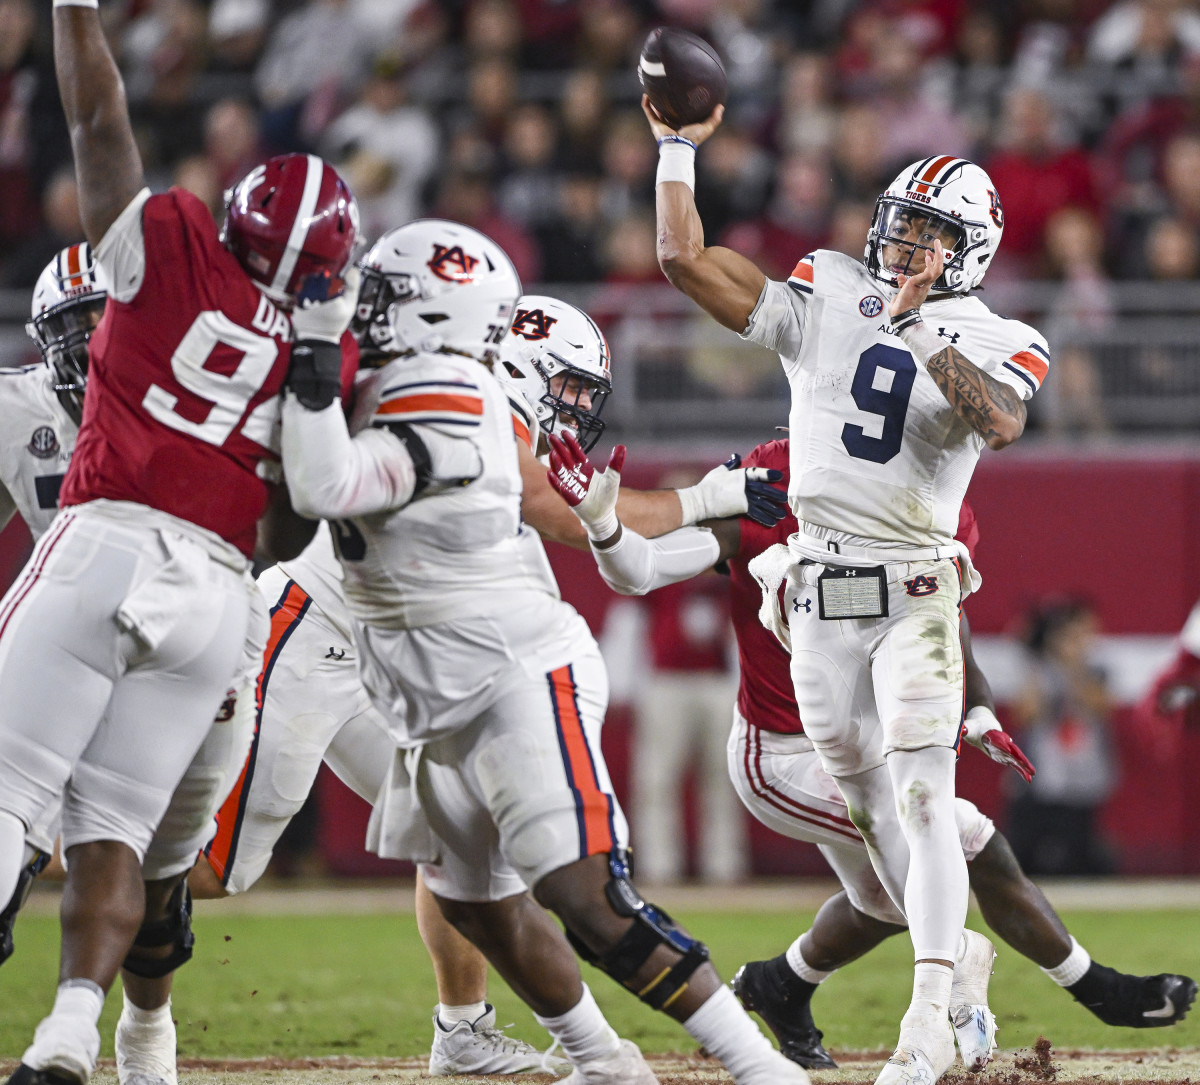 Robby Ashford (9) throws the ball deep during the game between Auburn and Alabama at Bryant-Denny Stadium. Todd Van Emst/AU Athletics